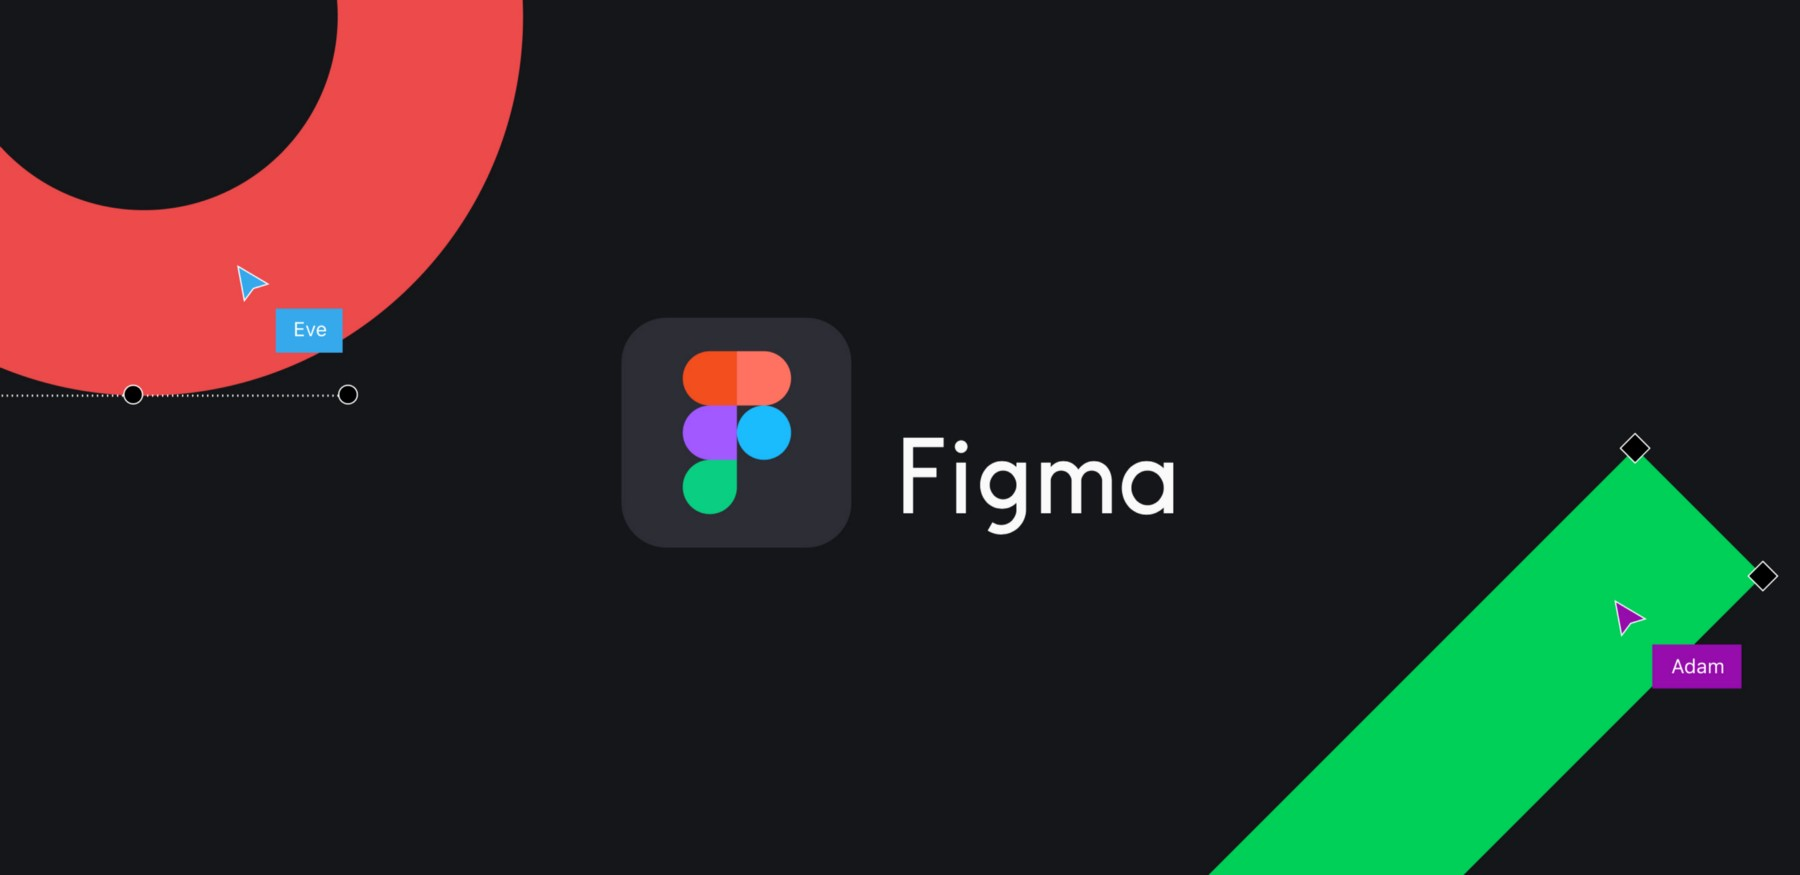 Figma confirms an undisclosed funding round that increases its value to .5 billion